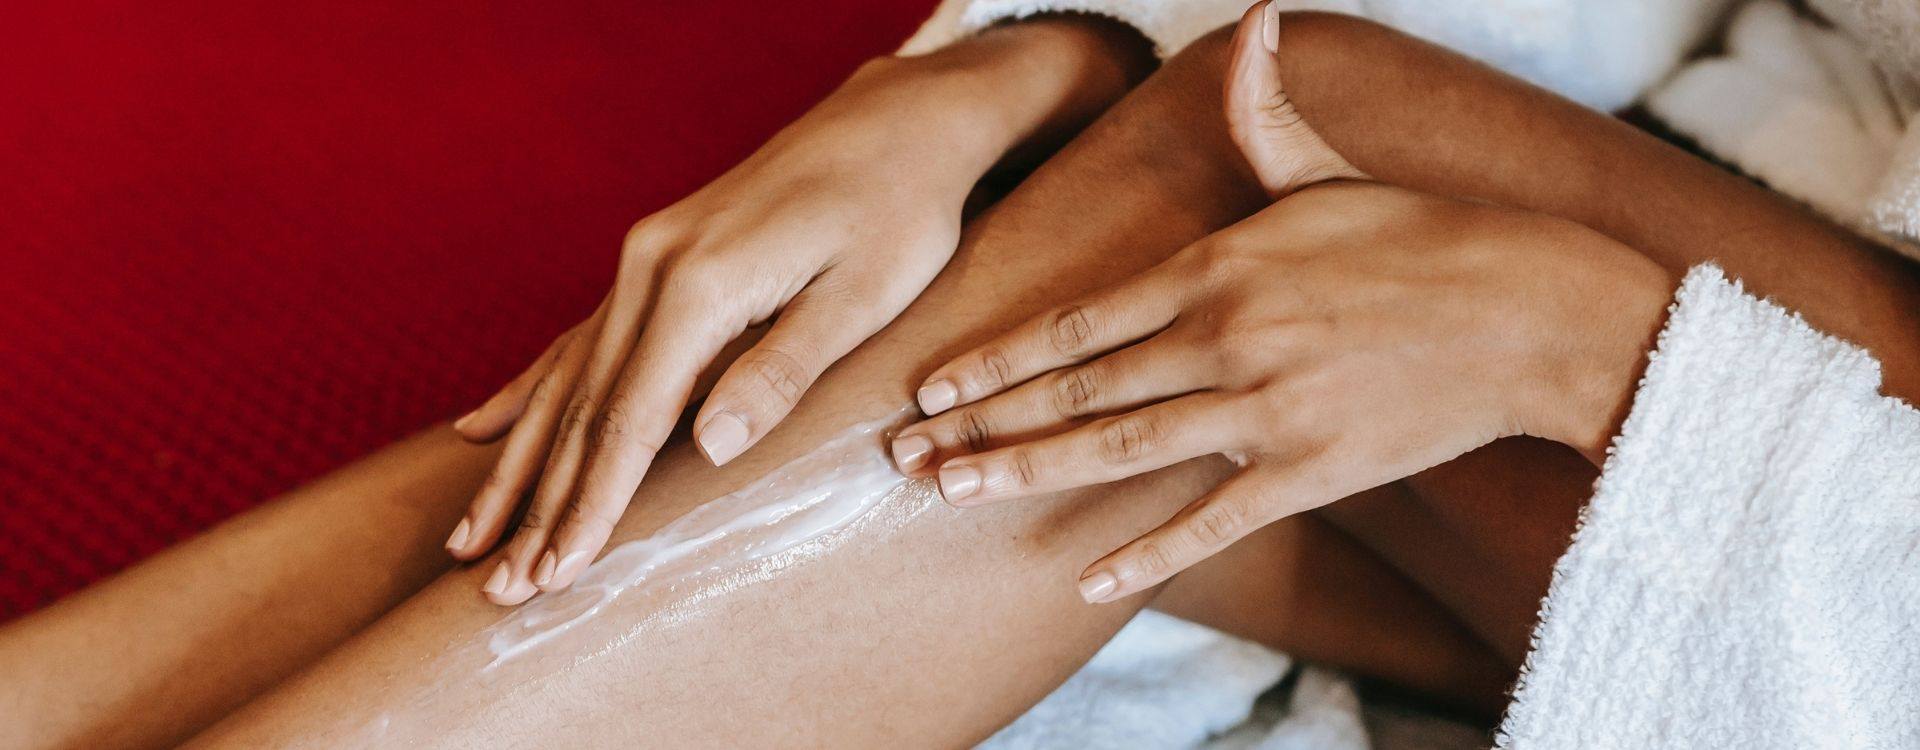 Using Topical CBD for Aches and Soreness